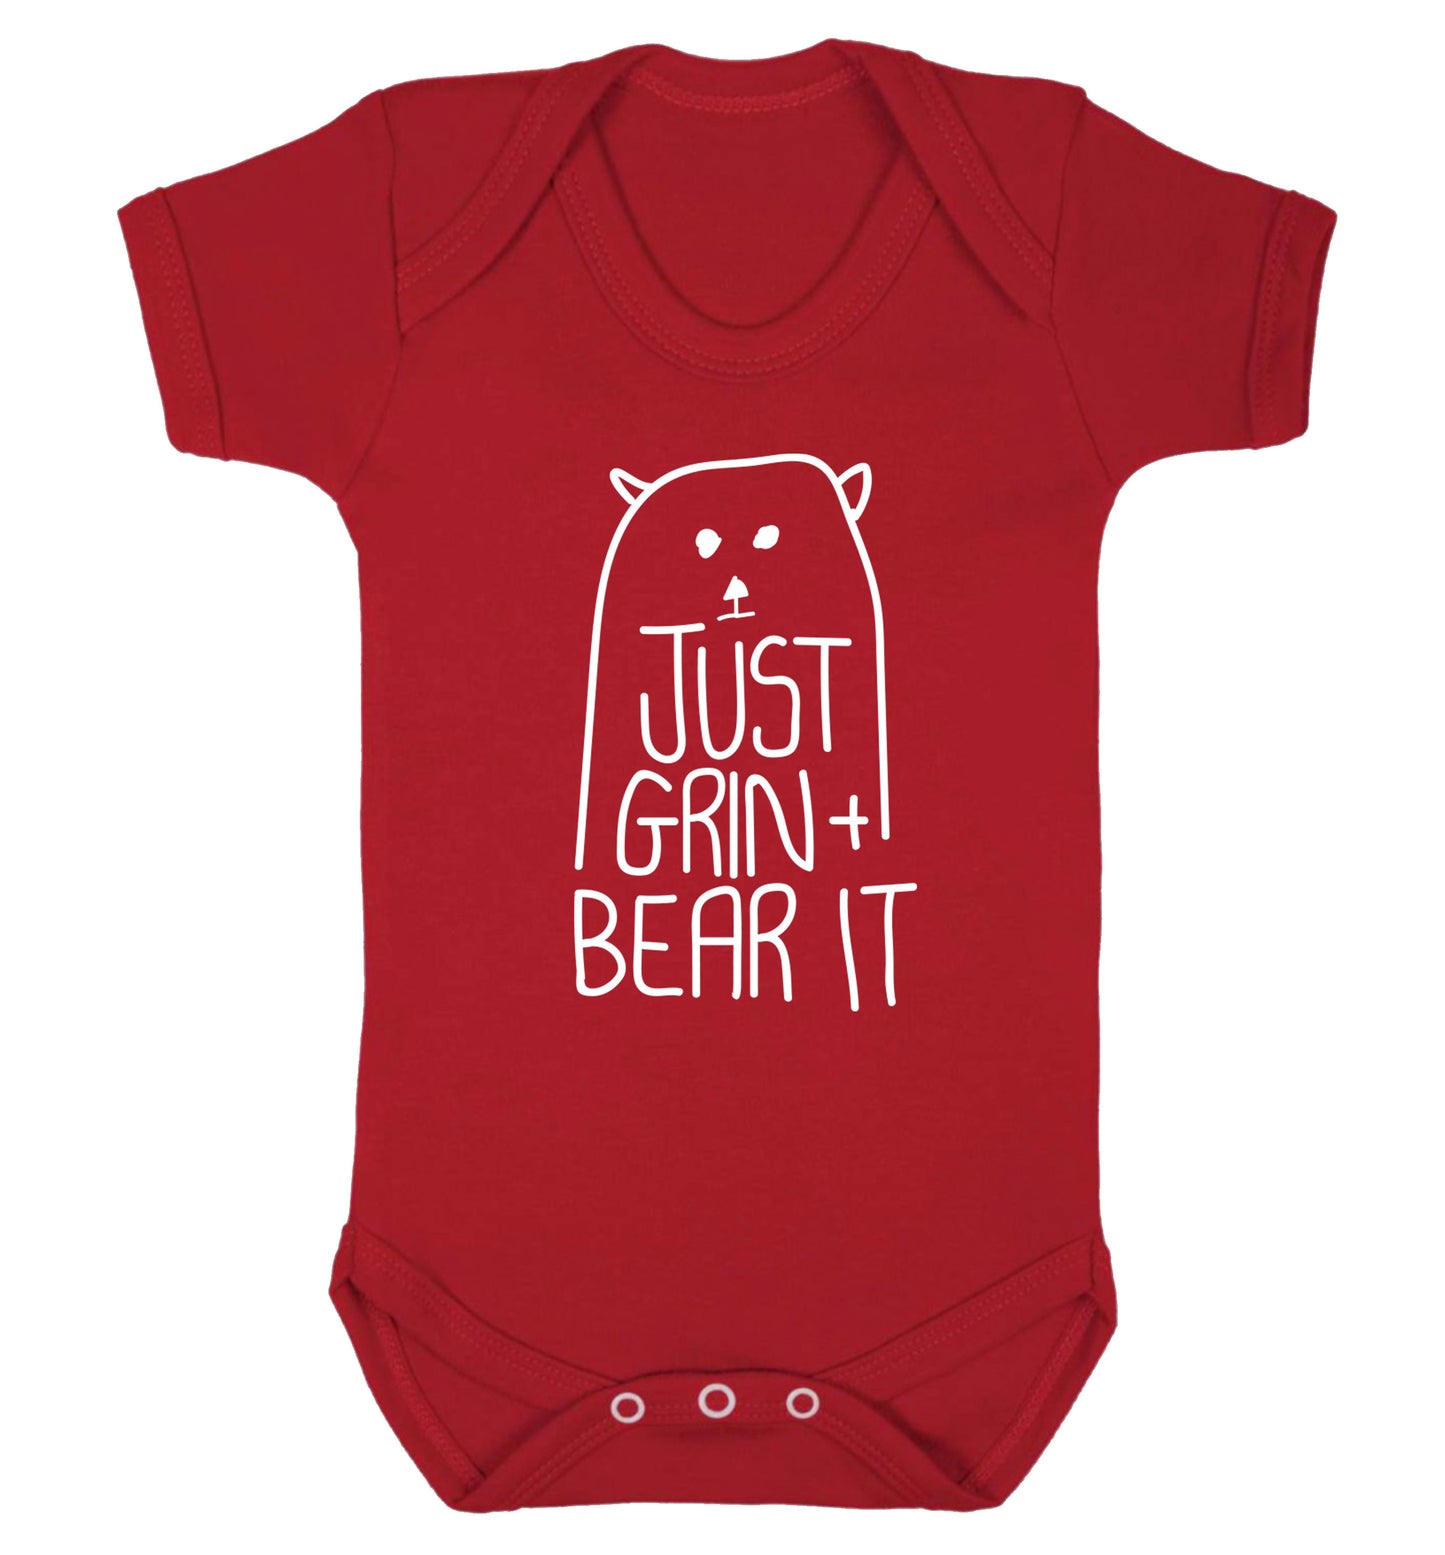 Just grin and bear it Baby Vest red 18-24 months